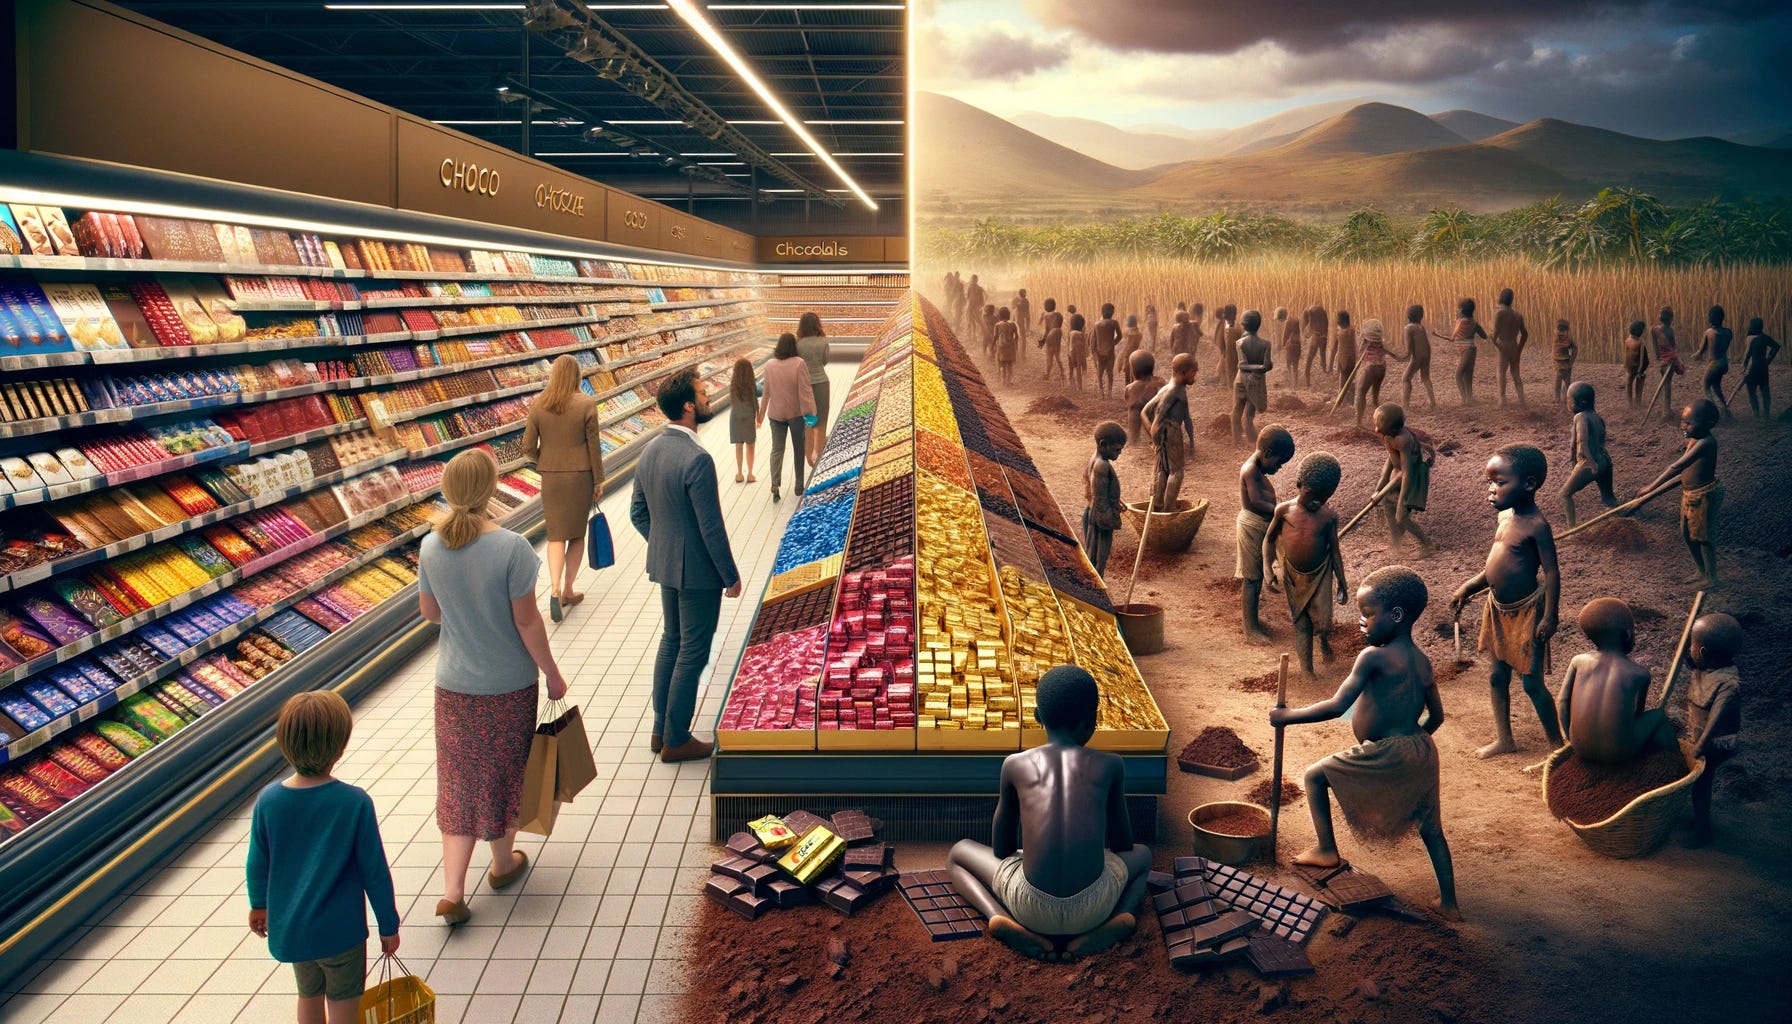 A powerful and thought-provoking image divided into two contrasting halves. On the left, a Western supermarket aisle, brightly lit and clean, filled with an array of luxurious chocolate brands. Shoppers, a diverse group of adults of different descents, are casually selecting chocolates, depicting a sense of abundance and unawareness. On the right, the harsh reality of cocoa farming in Africa, with a focus on child labor. The scene shows children, appearing African, tired and overworked, harvesting cocoa under the harsh sun, with a barren, arid landscape in the background. This side of the image should evoke a sense of struggle and hardship, starkly contrasting with the left side. This juxtaposition powerfully conveys the unintended consequences of Western policies on cocoa child labor.